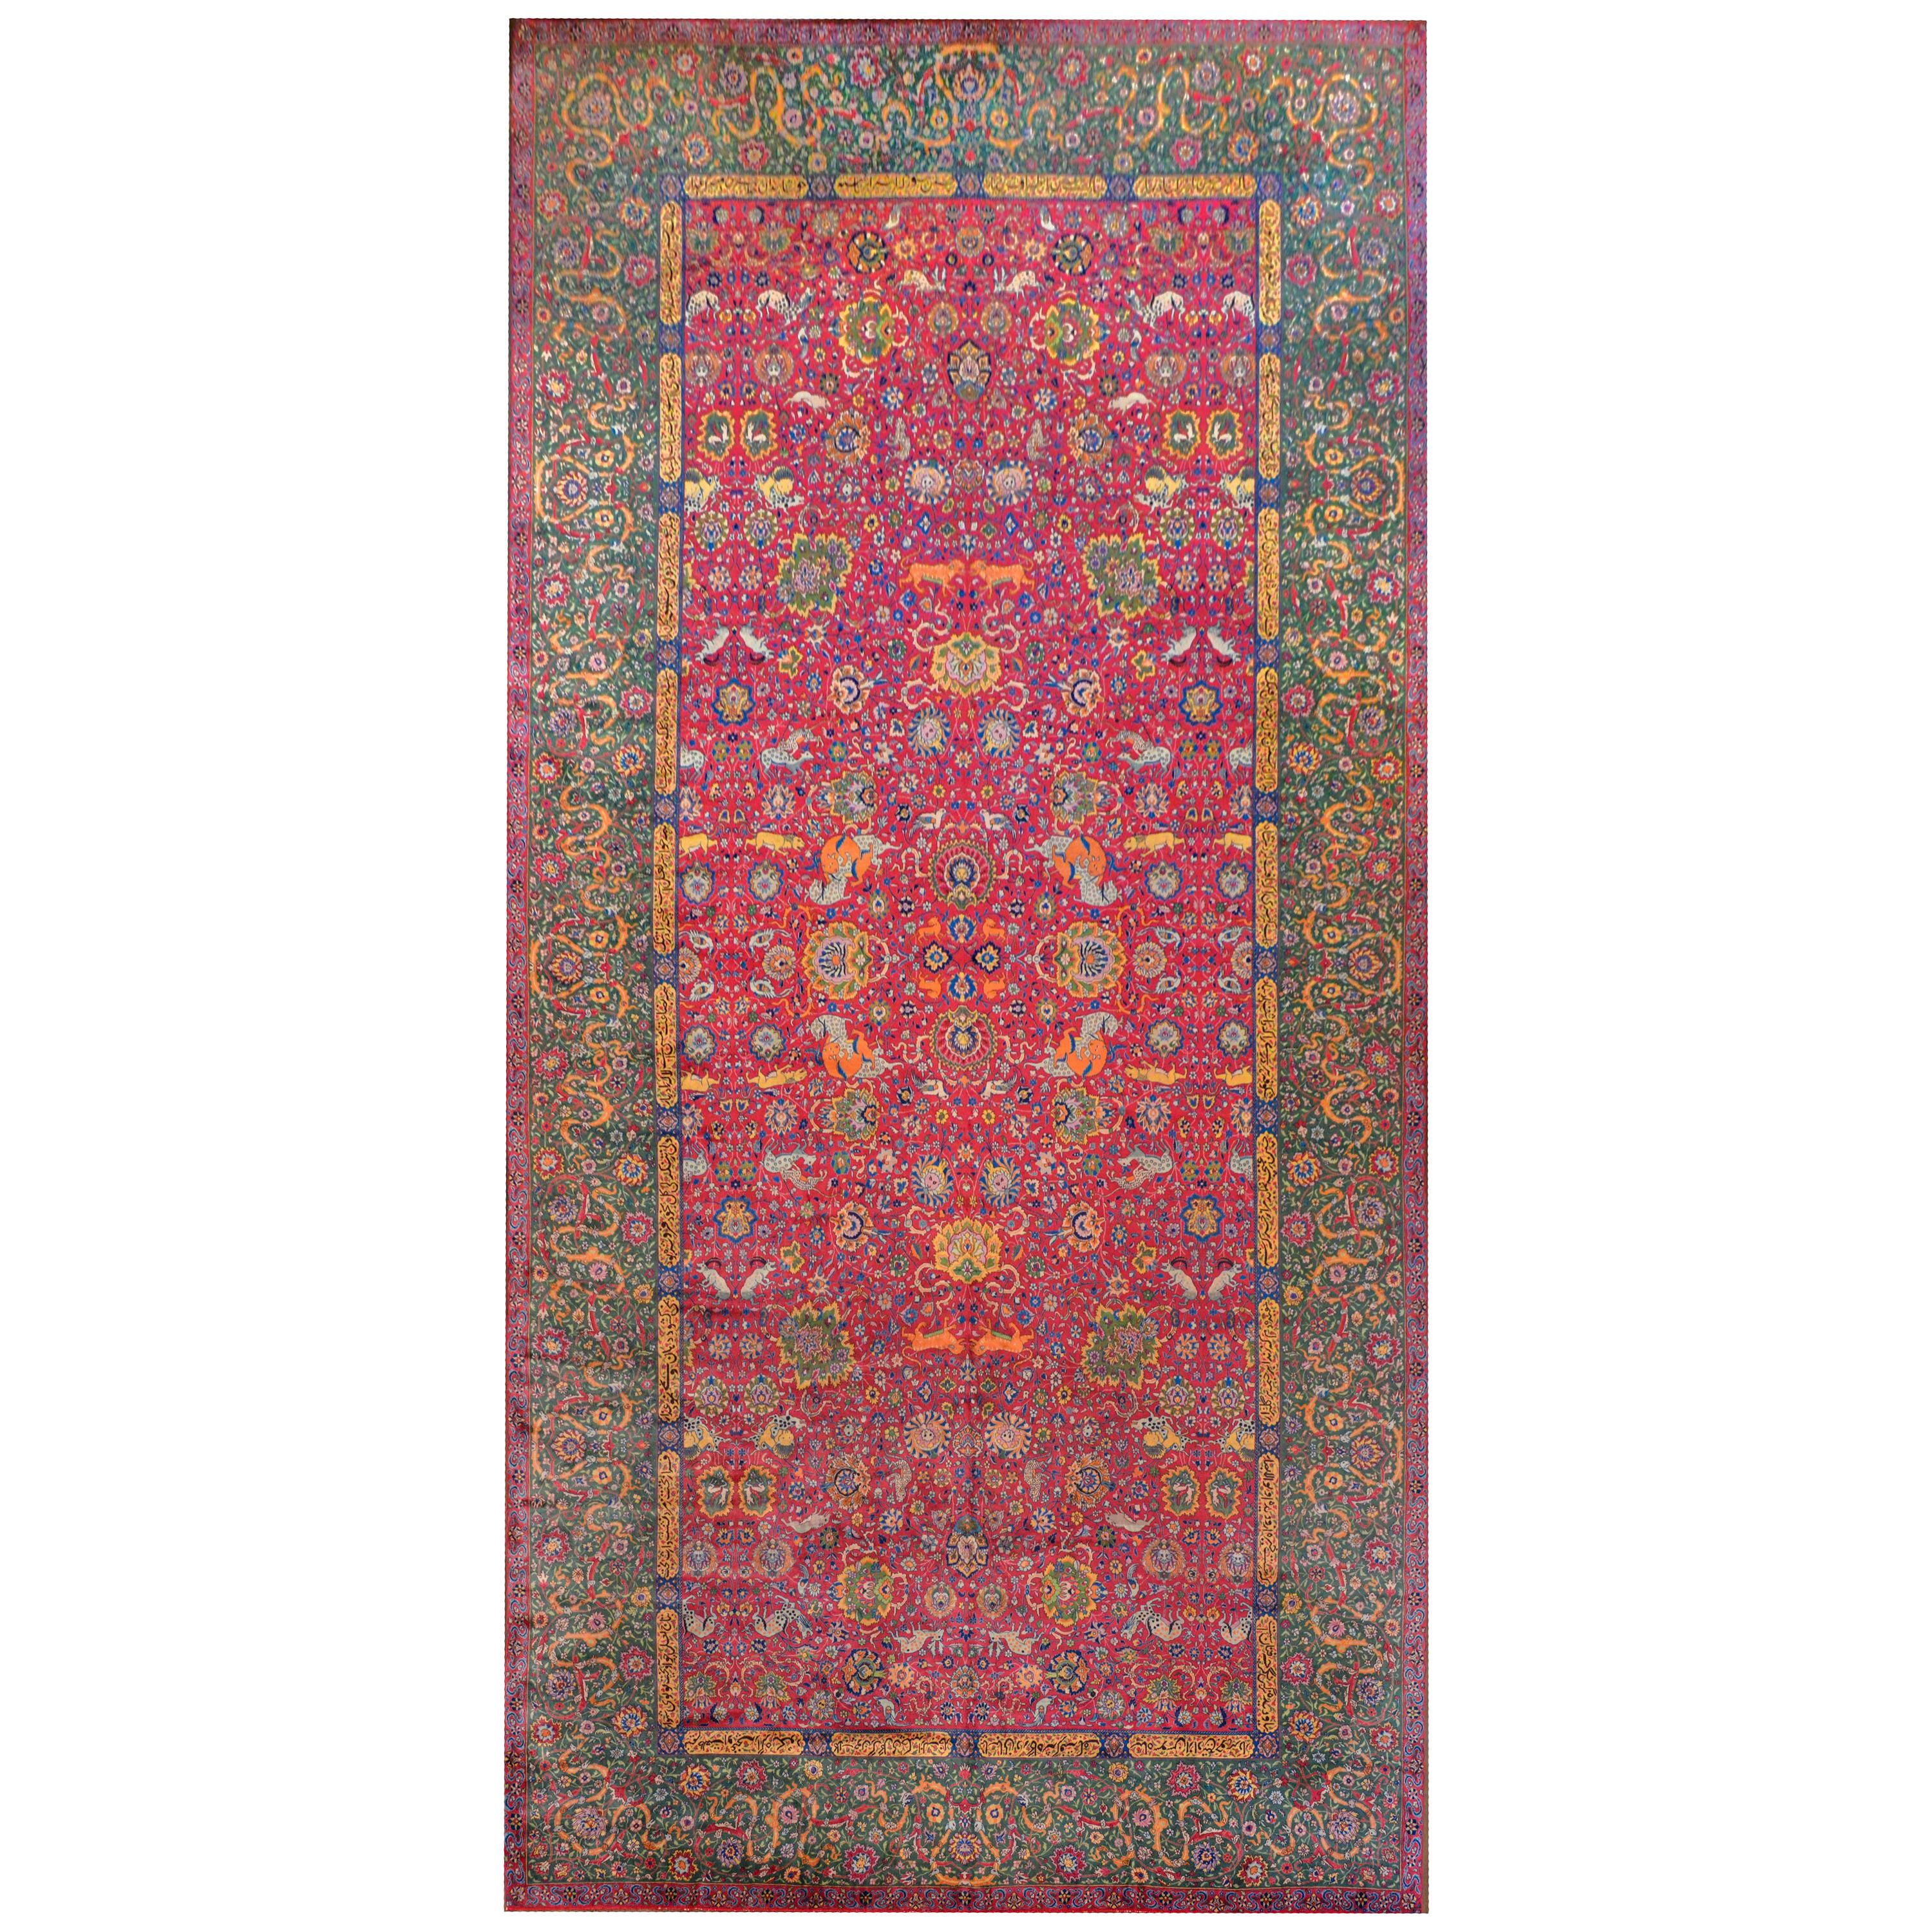 Wonderful Early 20th Century Agra Rug For Sale